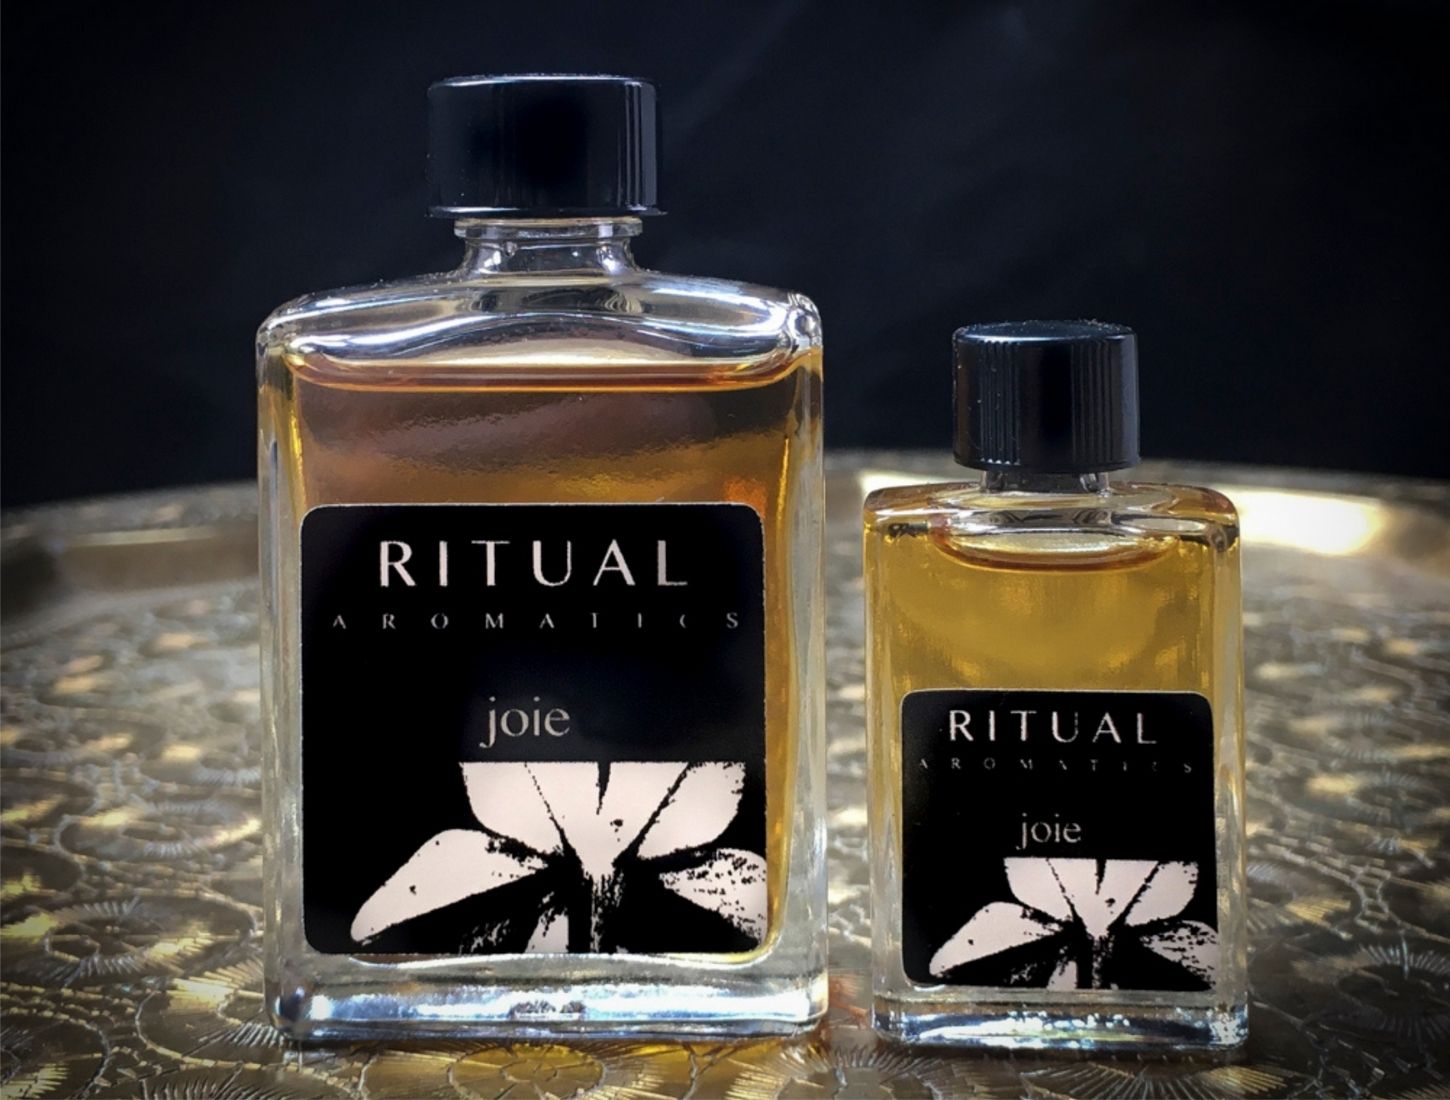 Ritual Aromatics Joie Natural Perfume 5ml and 15 ml bottles on a brass tray 